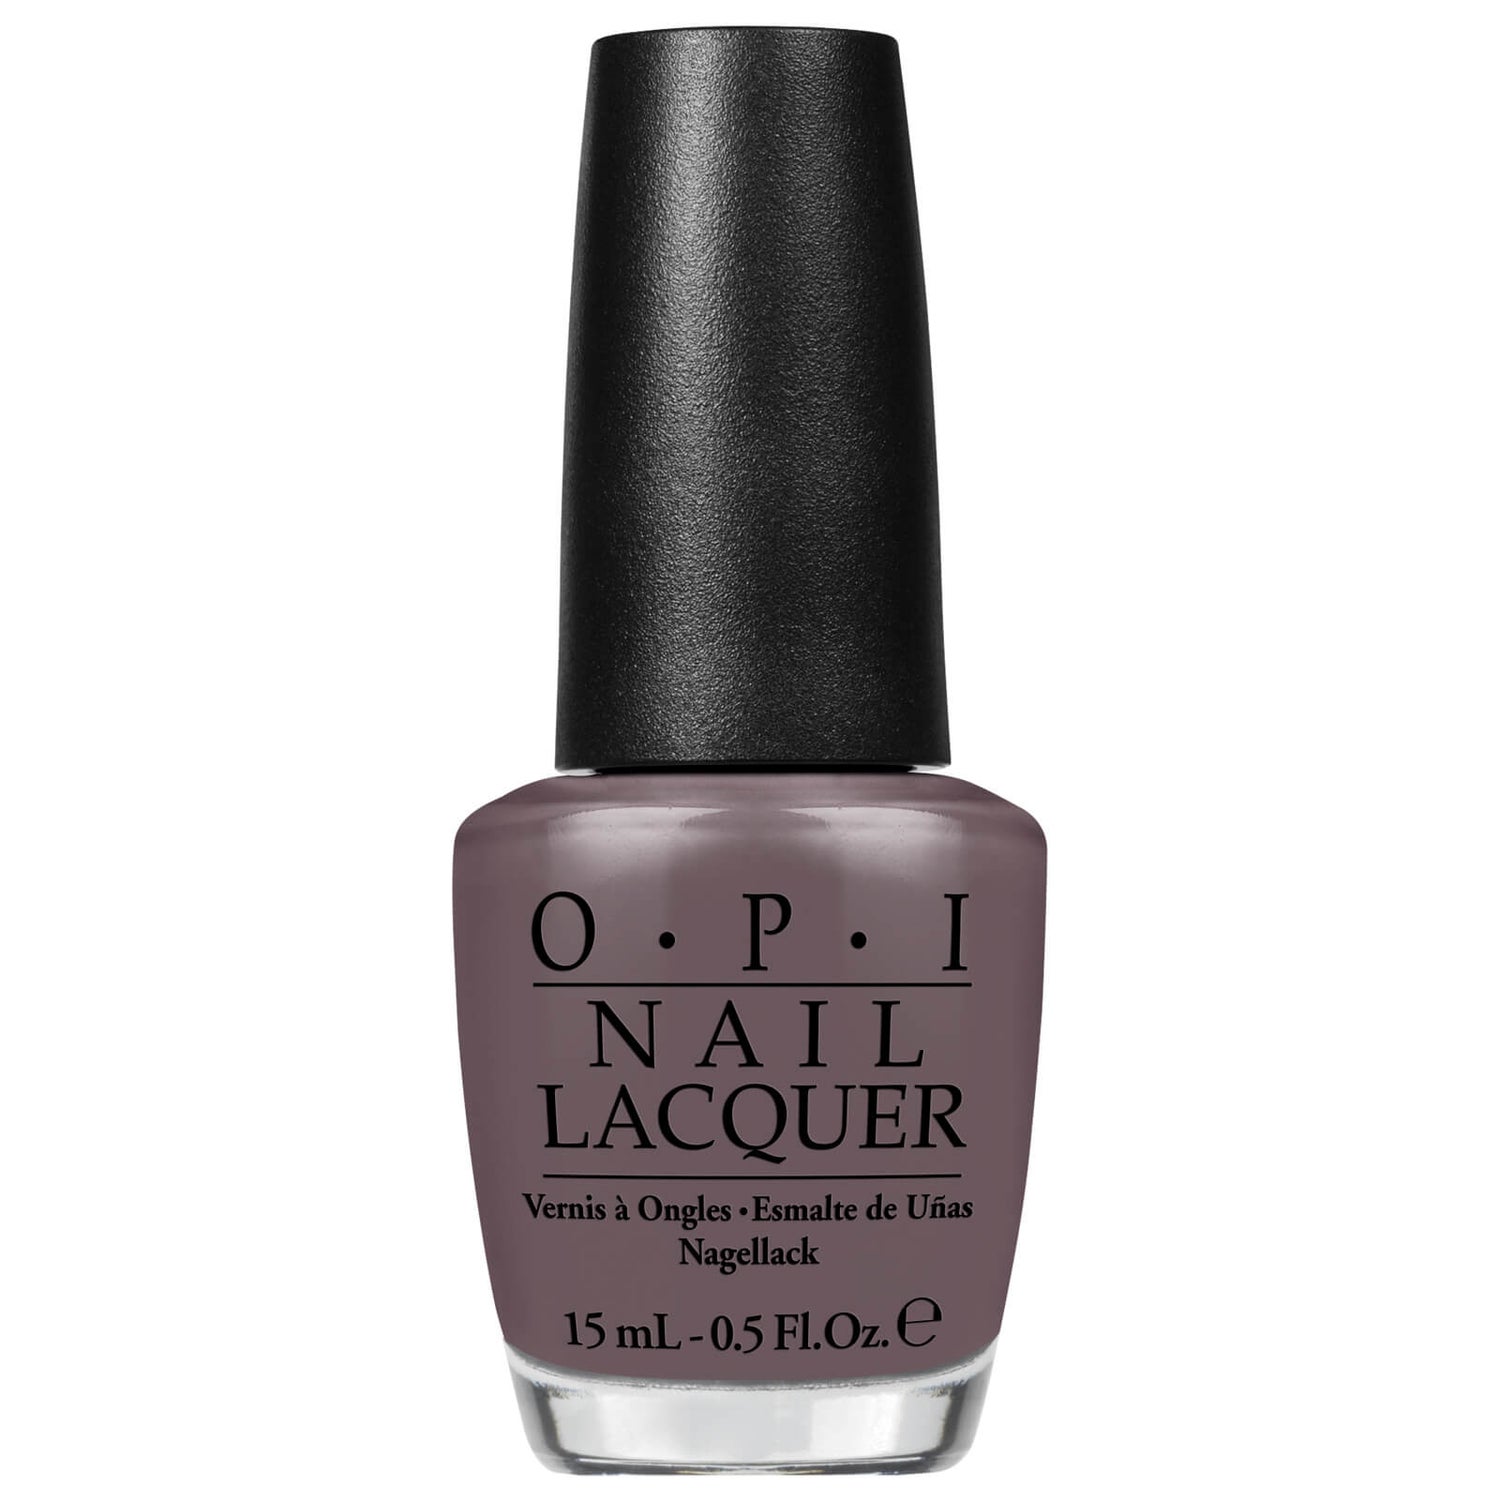 Can OPI's new repair mode strengthen my nails in two weeks? - BeautyEQ